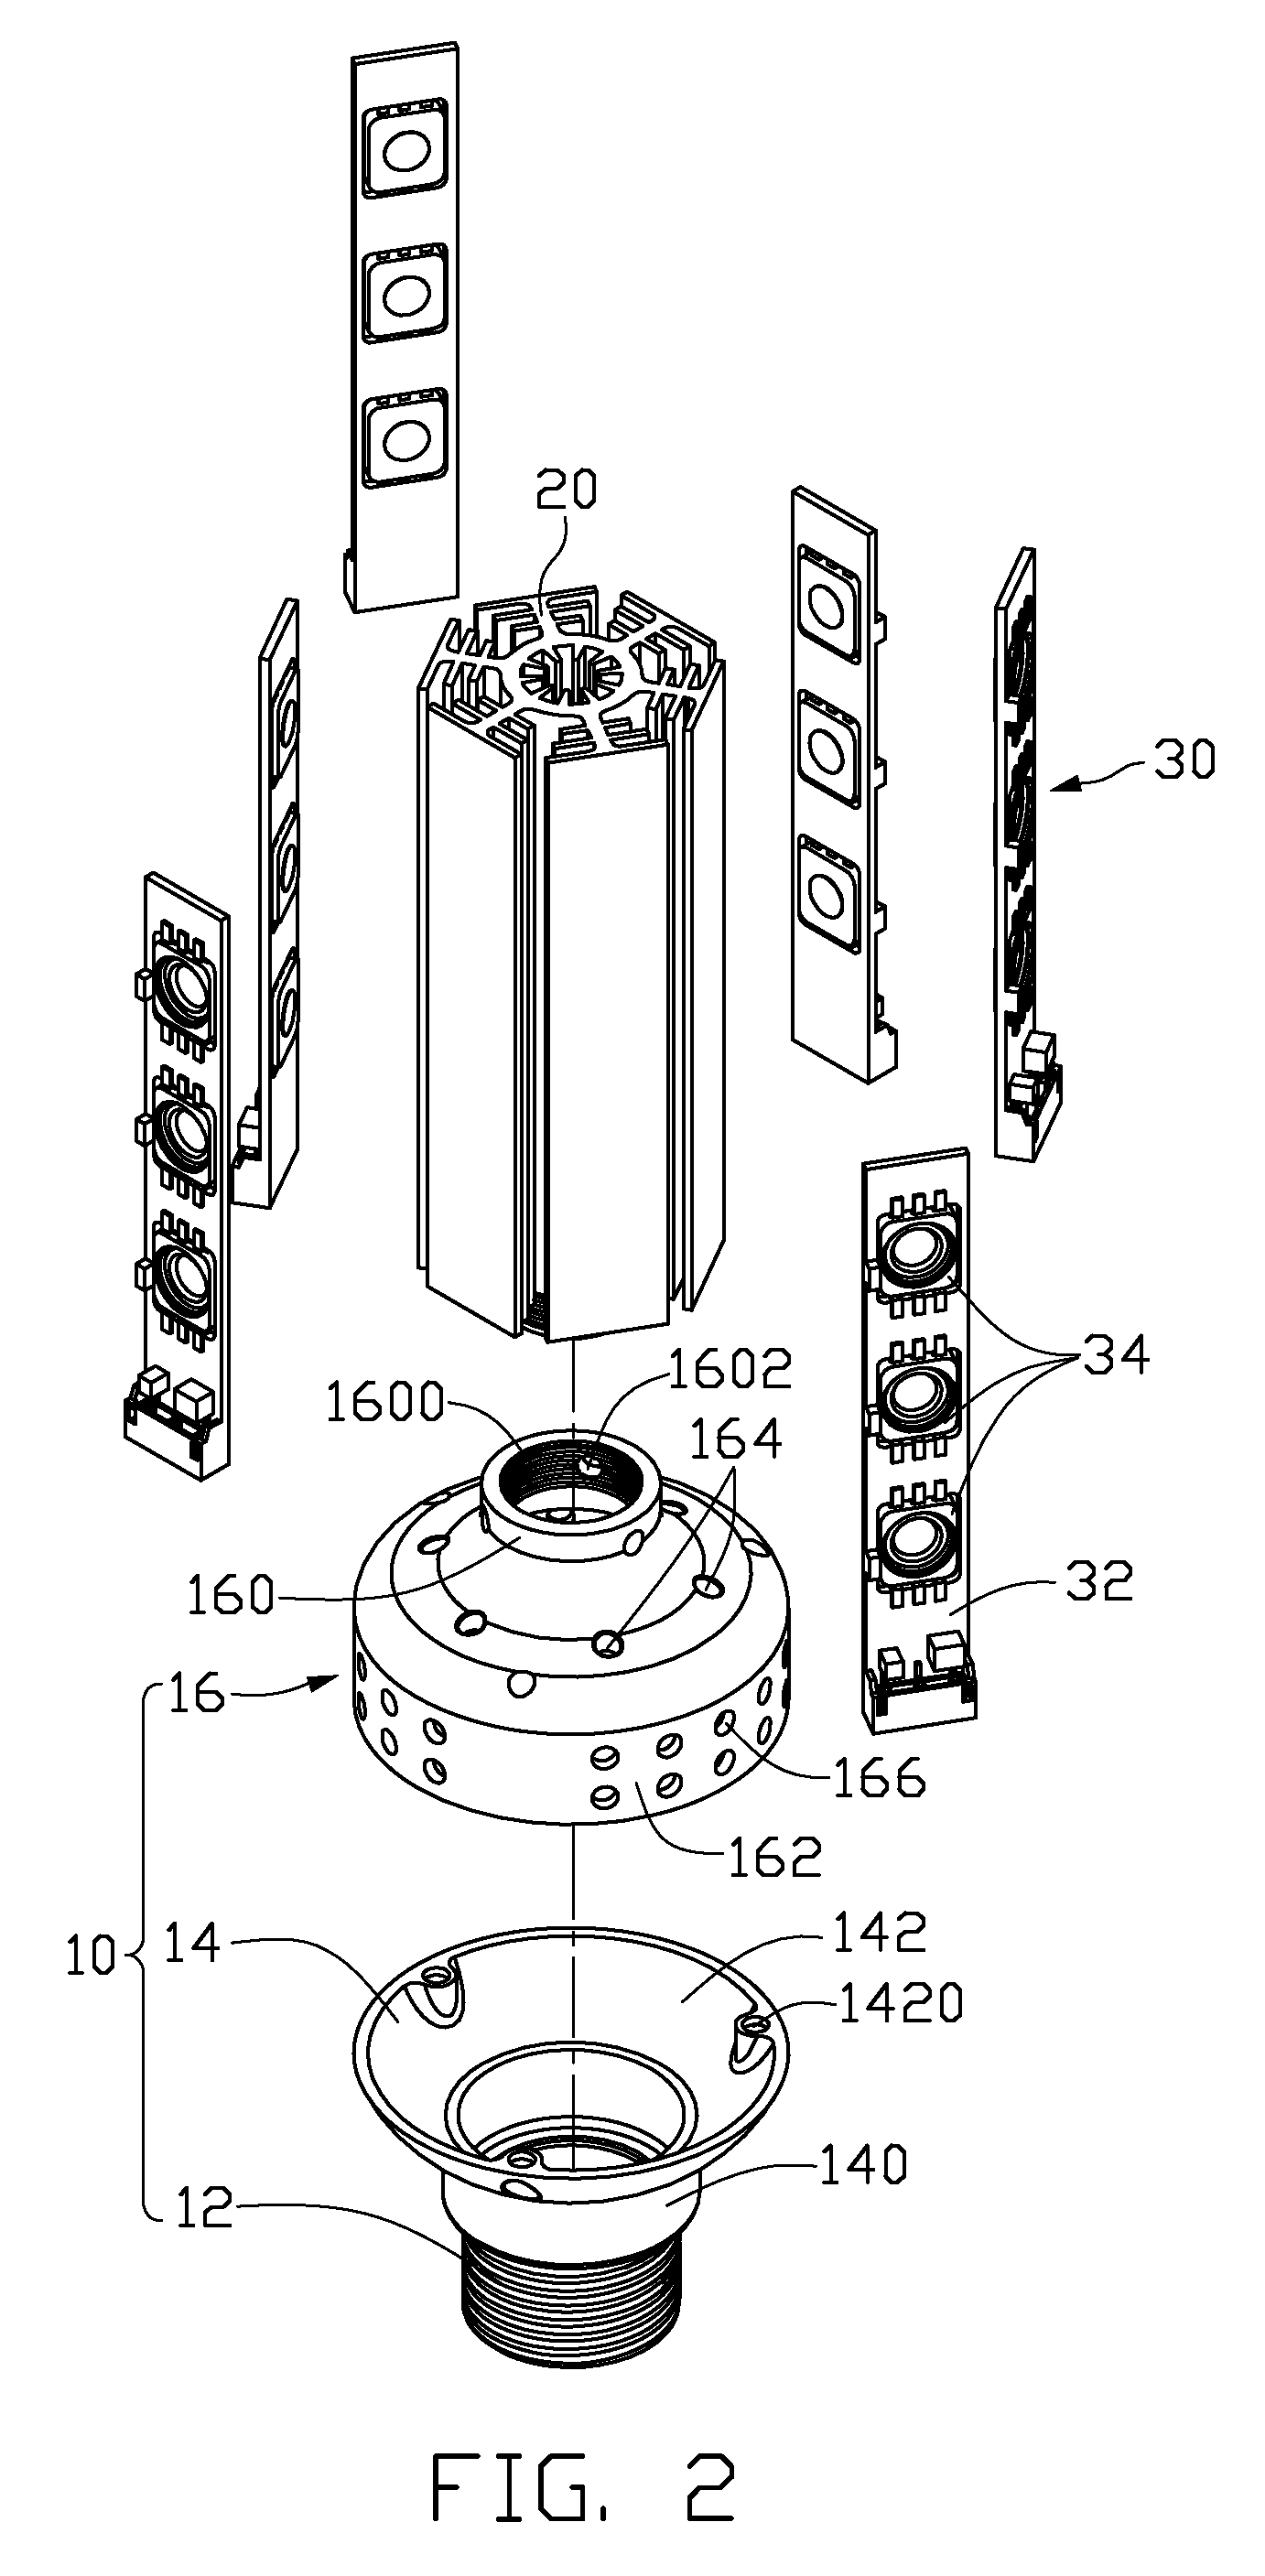 LED lamp having heat dissipation structure